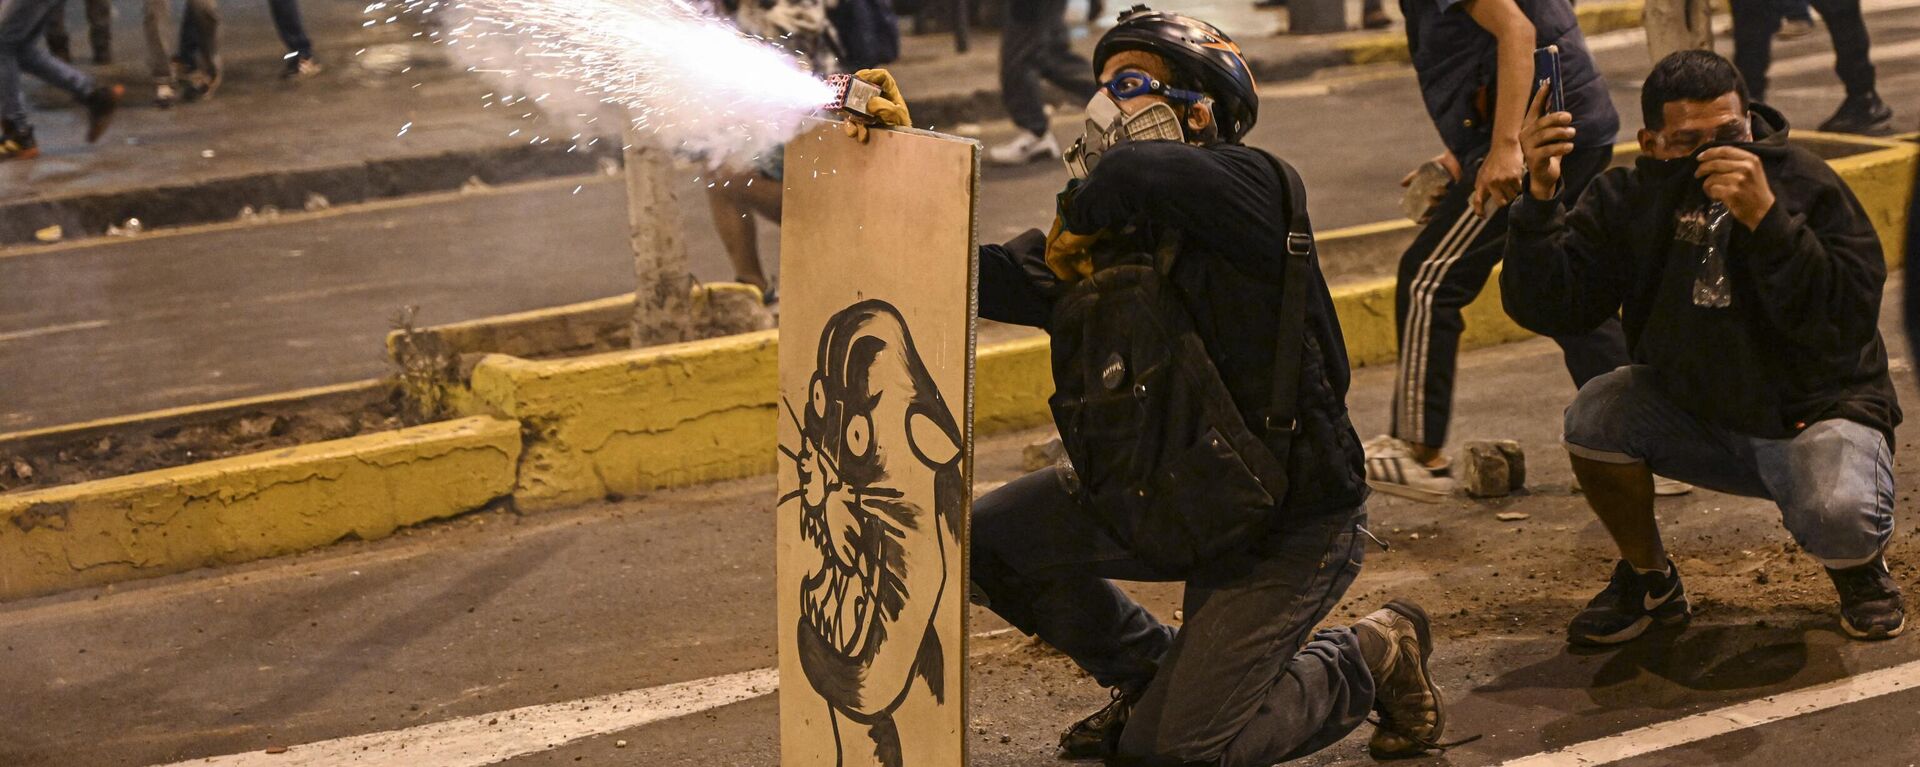 Supporters of former President Pedro Castillo launch firecrackers at riot police during a protest near the Congress in Lima on December 12, 2022 - Sputnik International, 1920, 13.12.2022